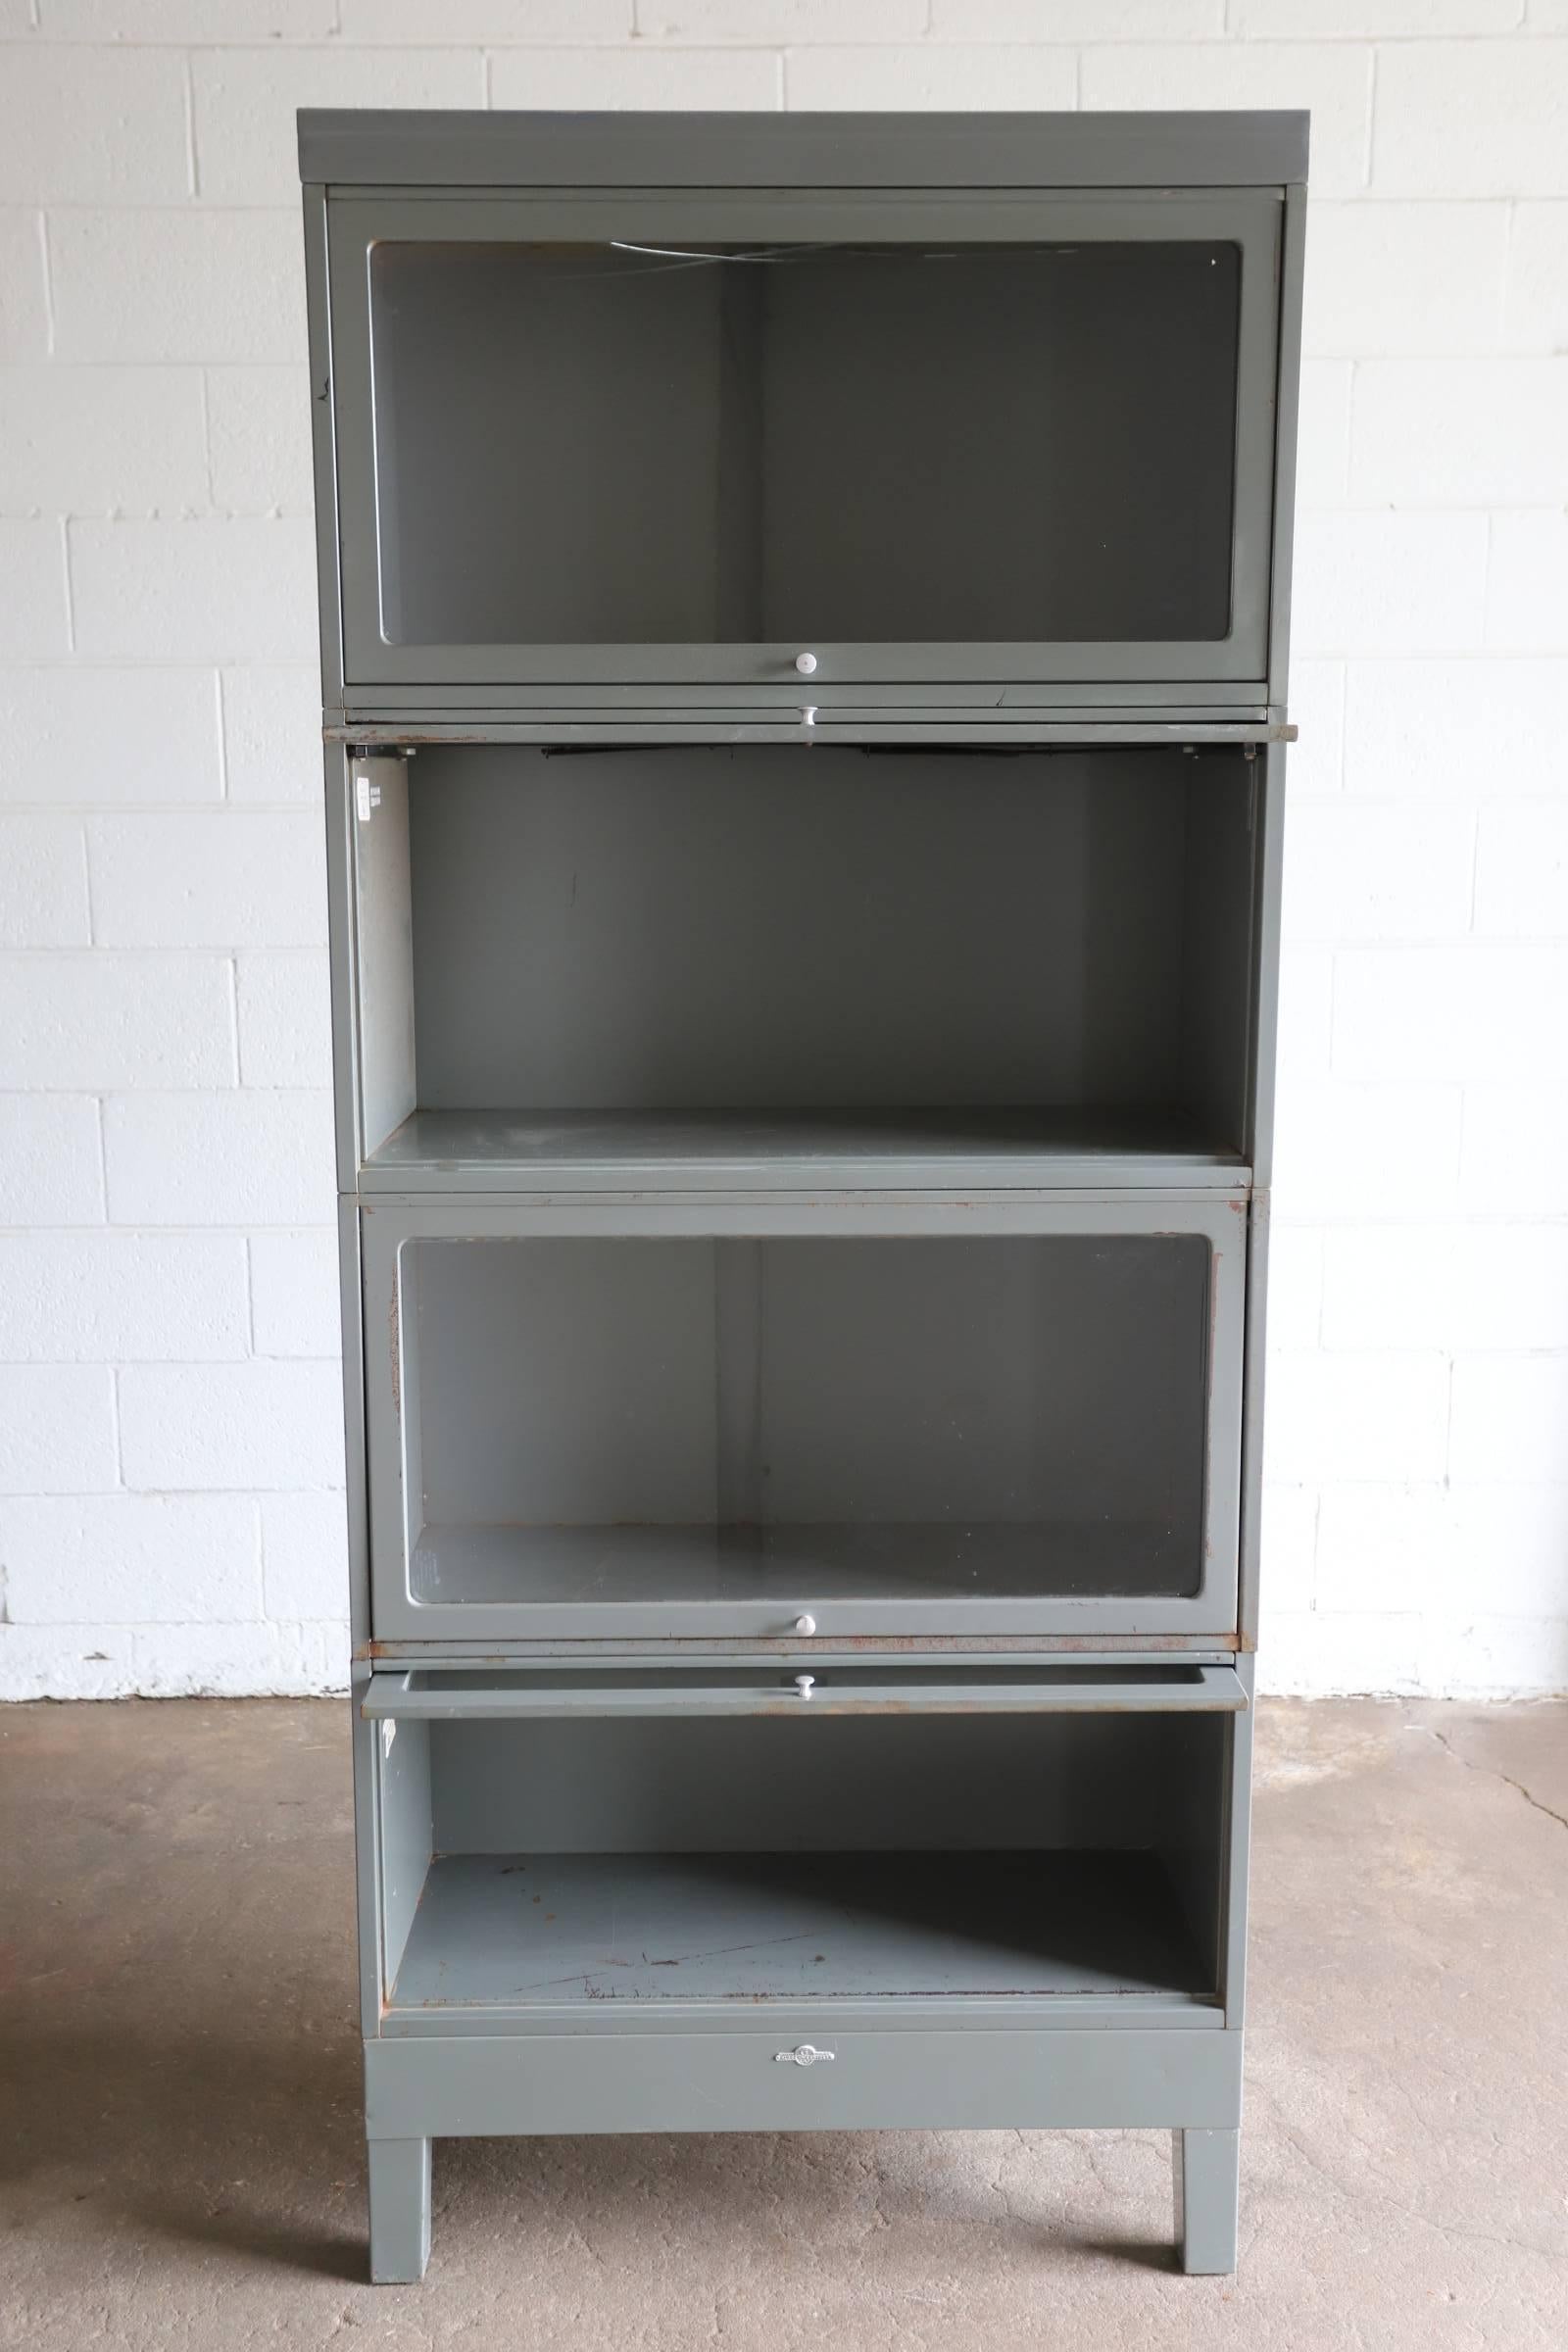 Industrial metal stacking lawyer or barrister bookcase with glass doors. Original gunmetal grey. Consists of six pieces, a base, a top and four boxes with glass doors. Boxes can be arranged in any order.